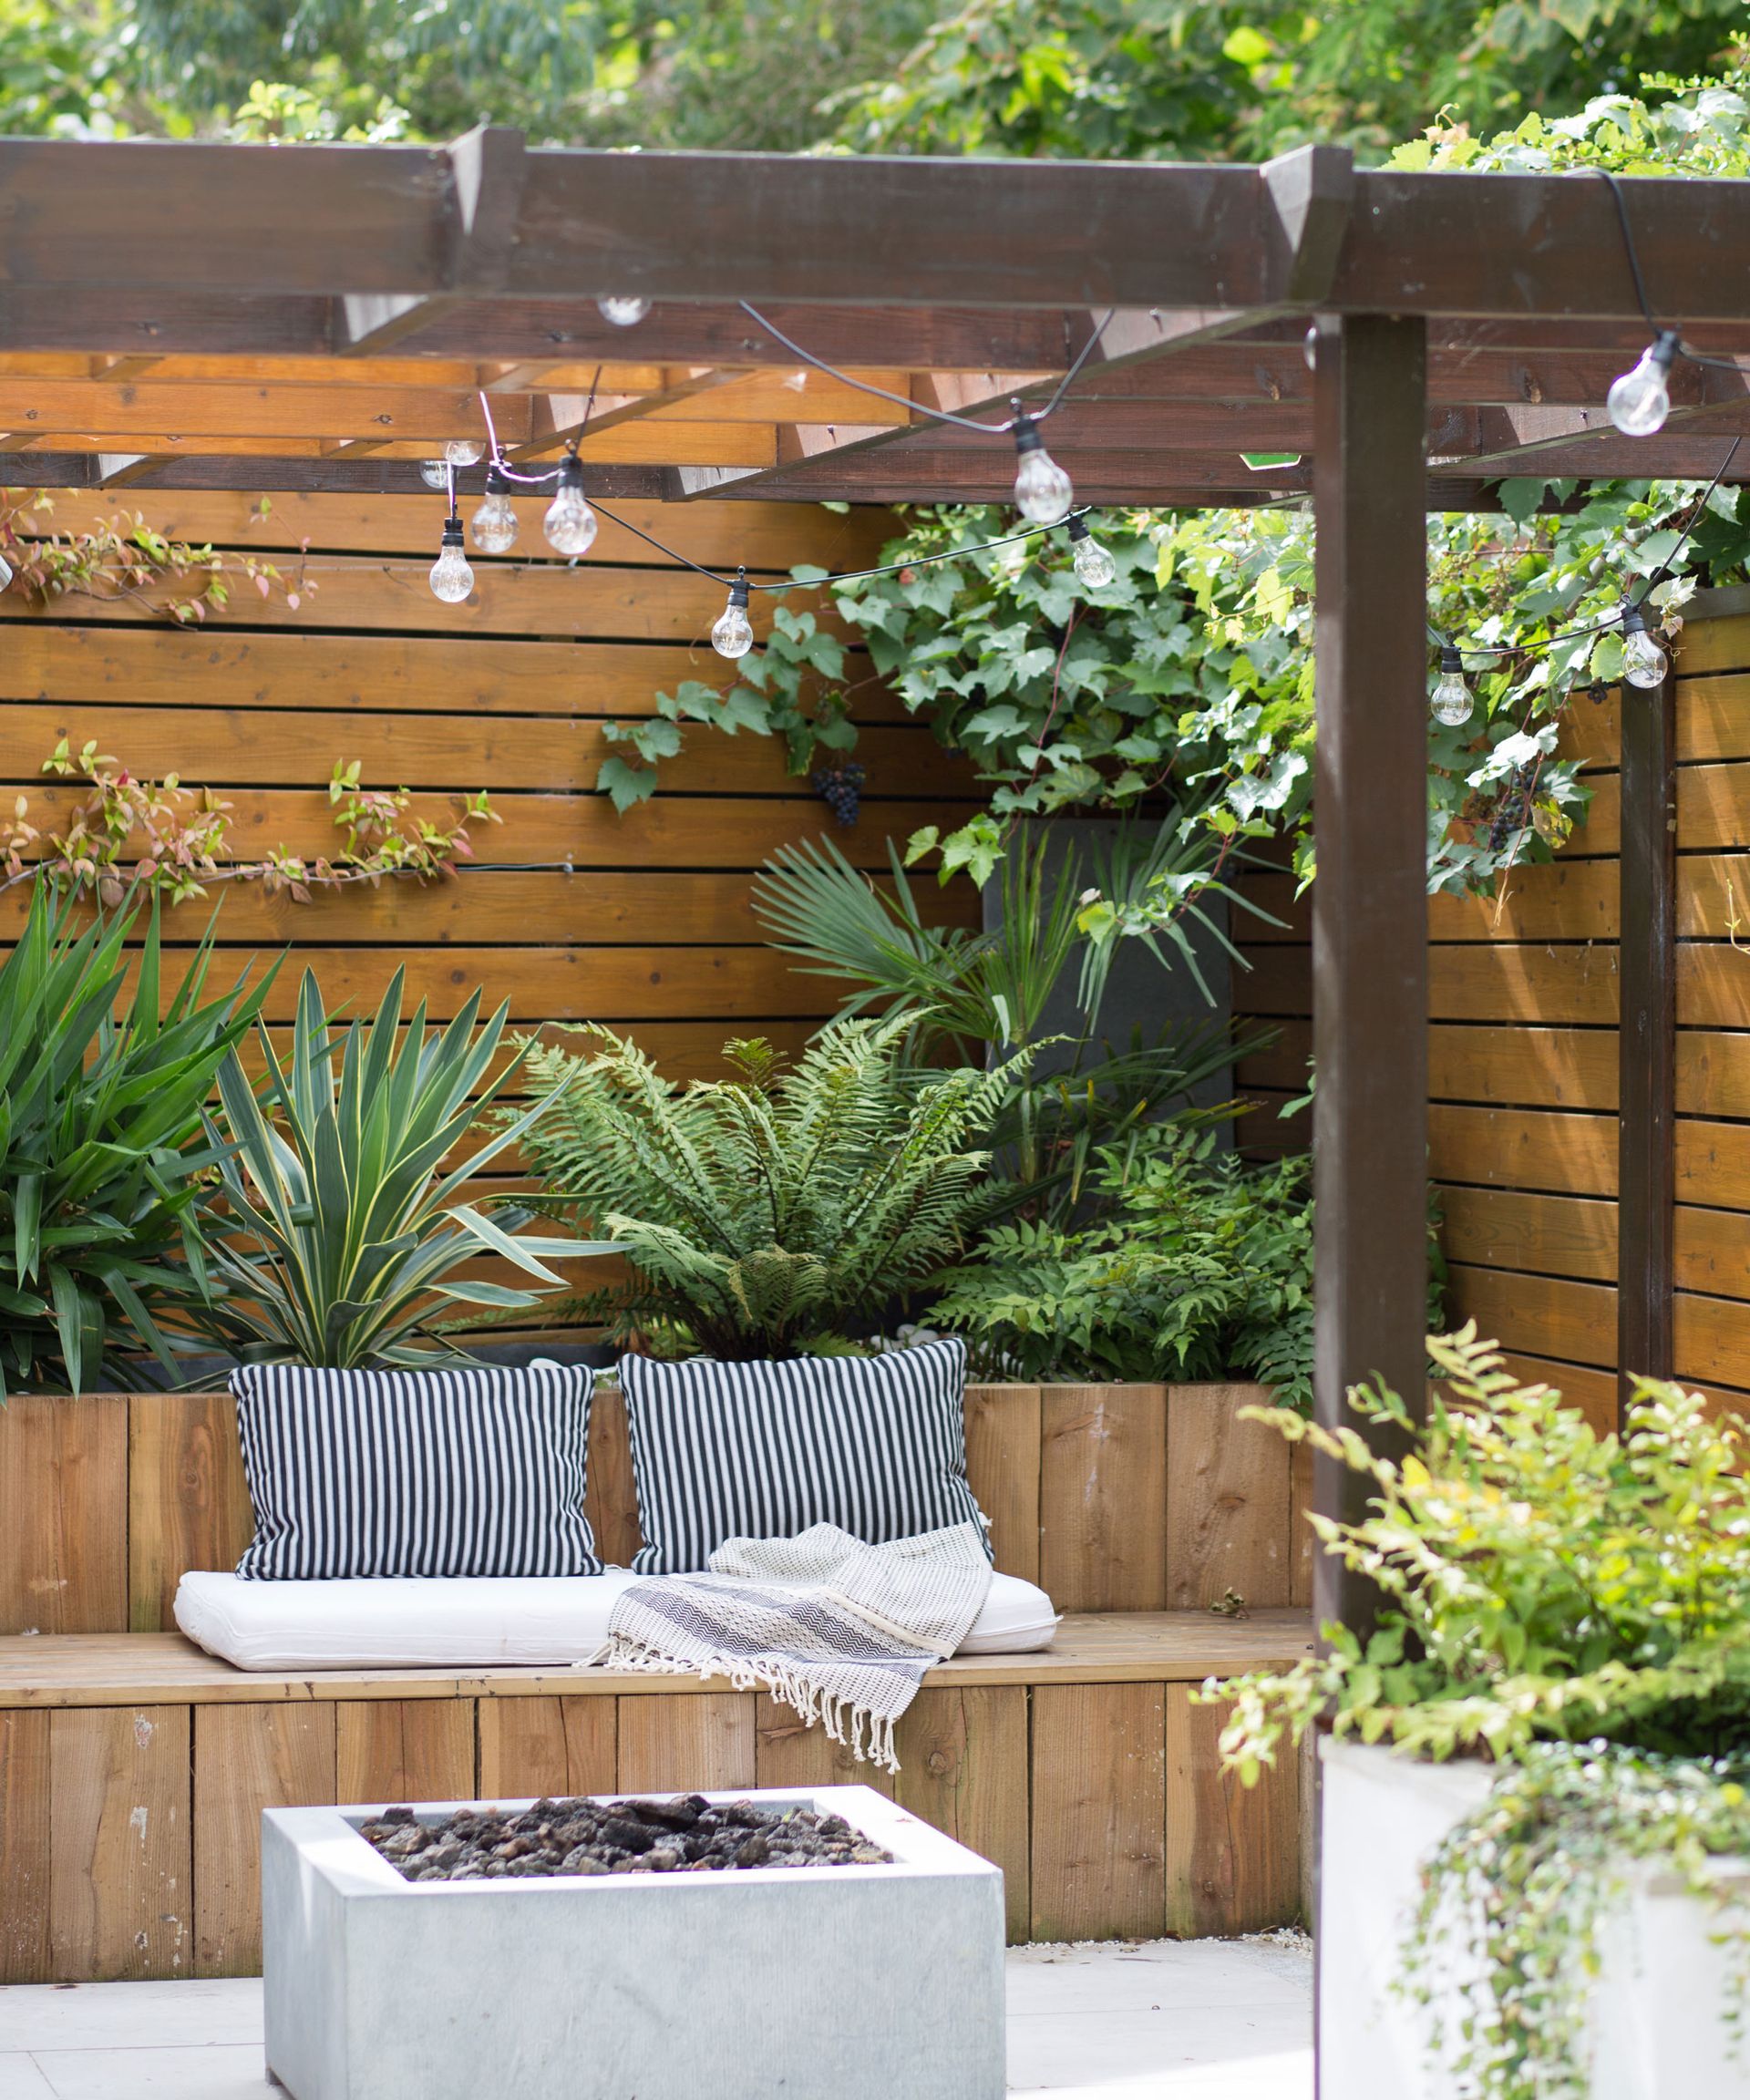 How to create backyard privacy without blocking light